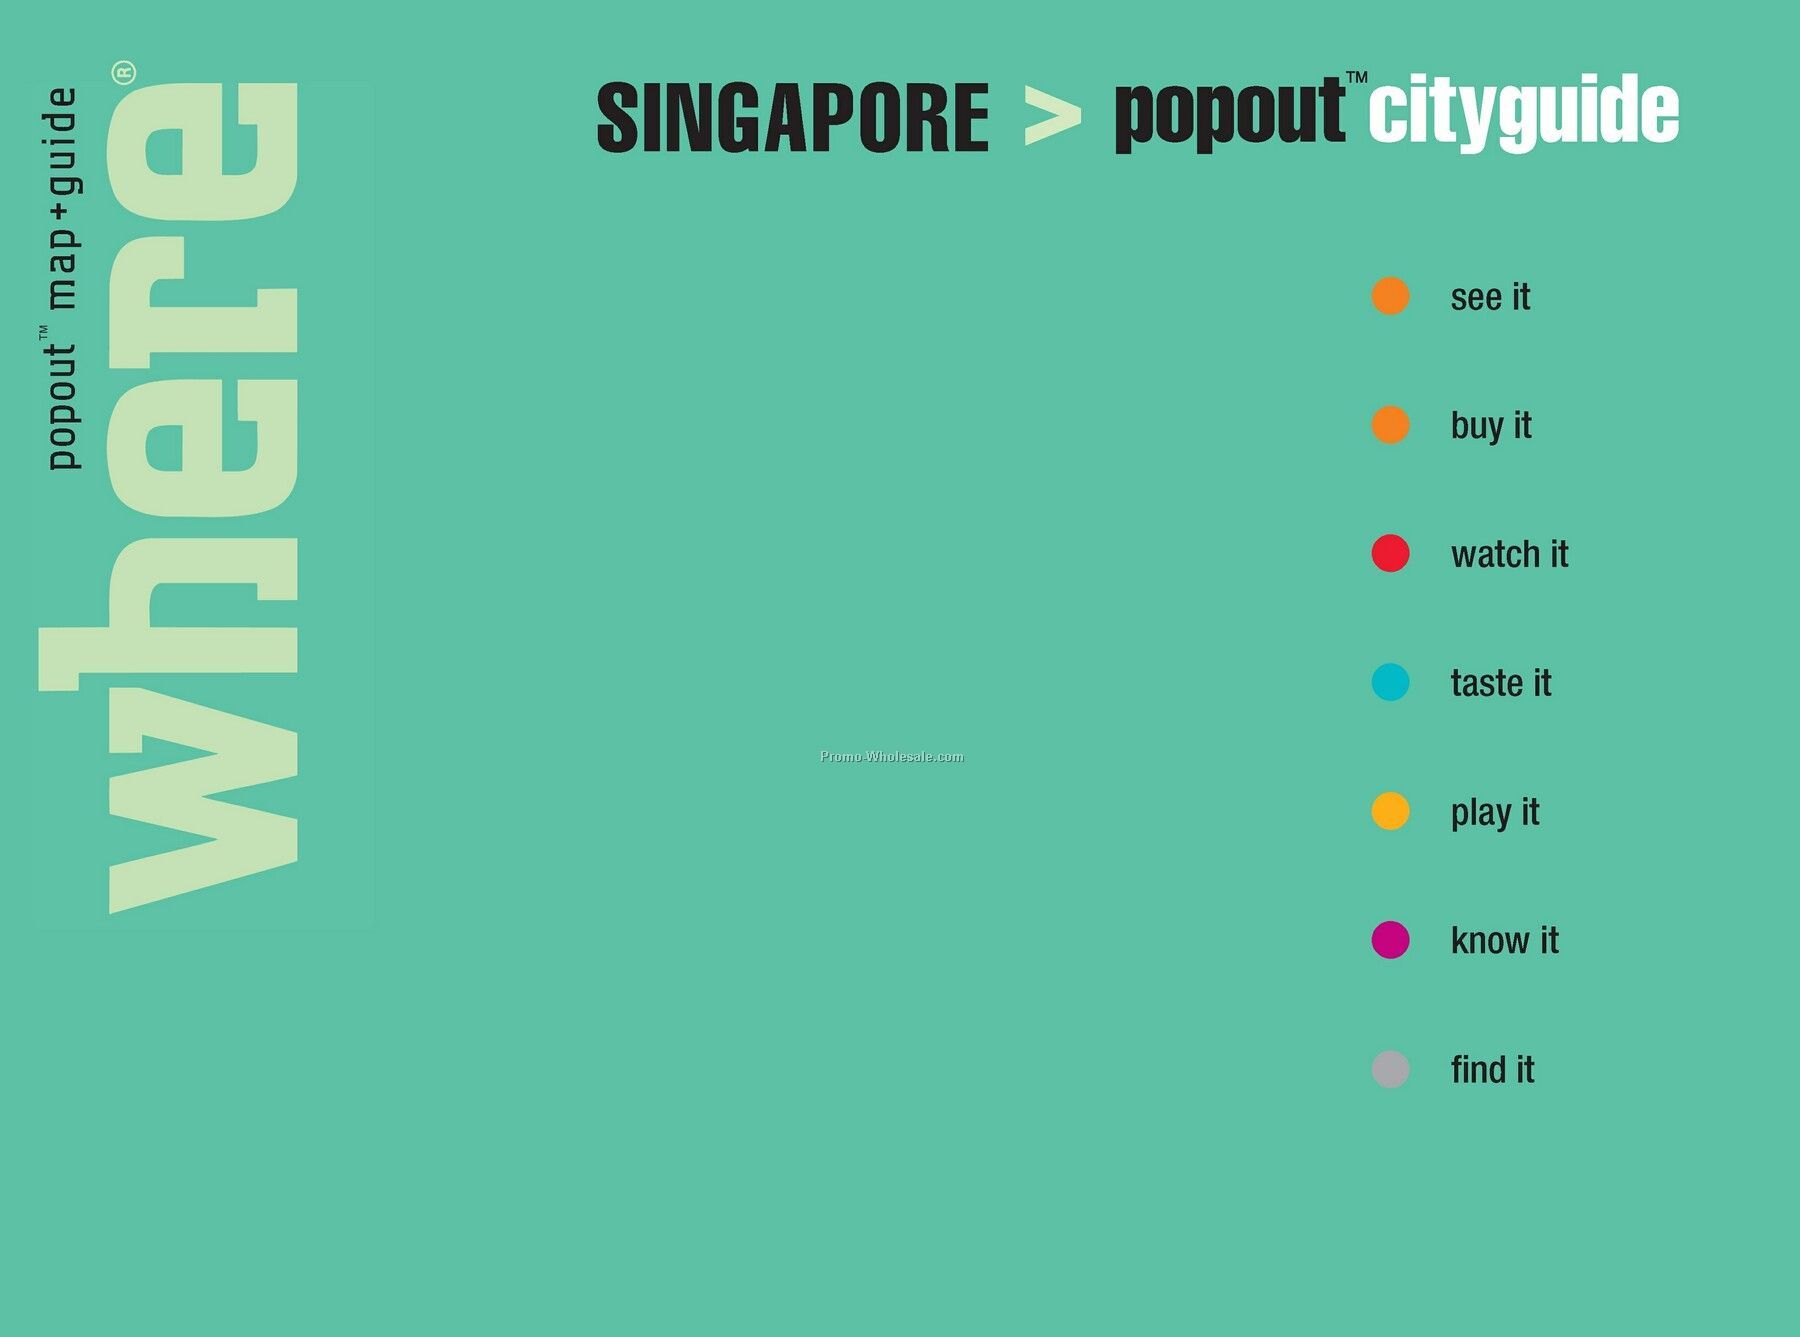 Travel Guides - International Guide Of Singapore - Featuring Popout Maps